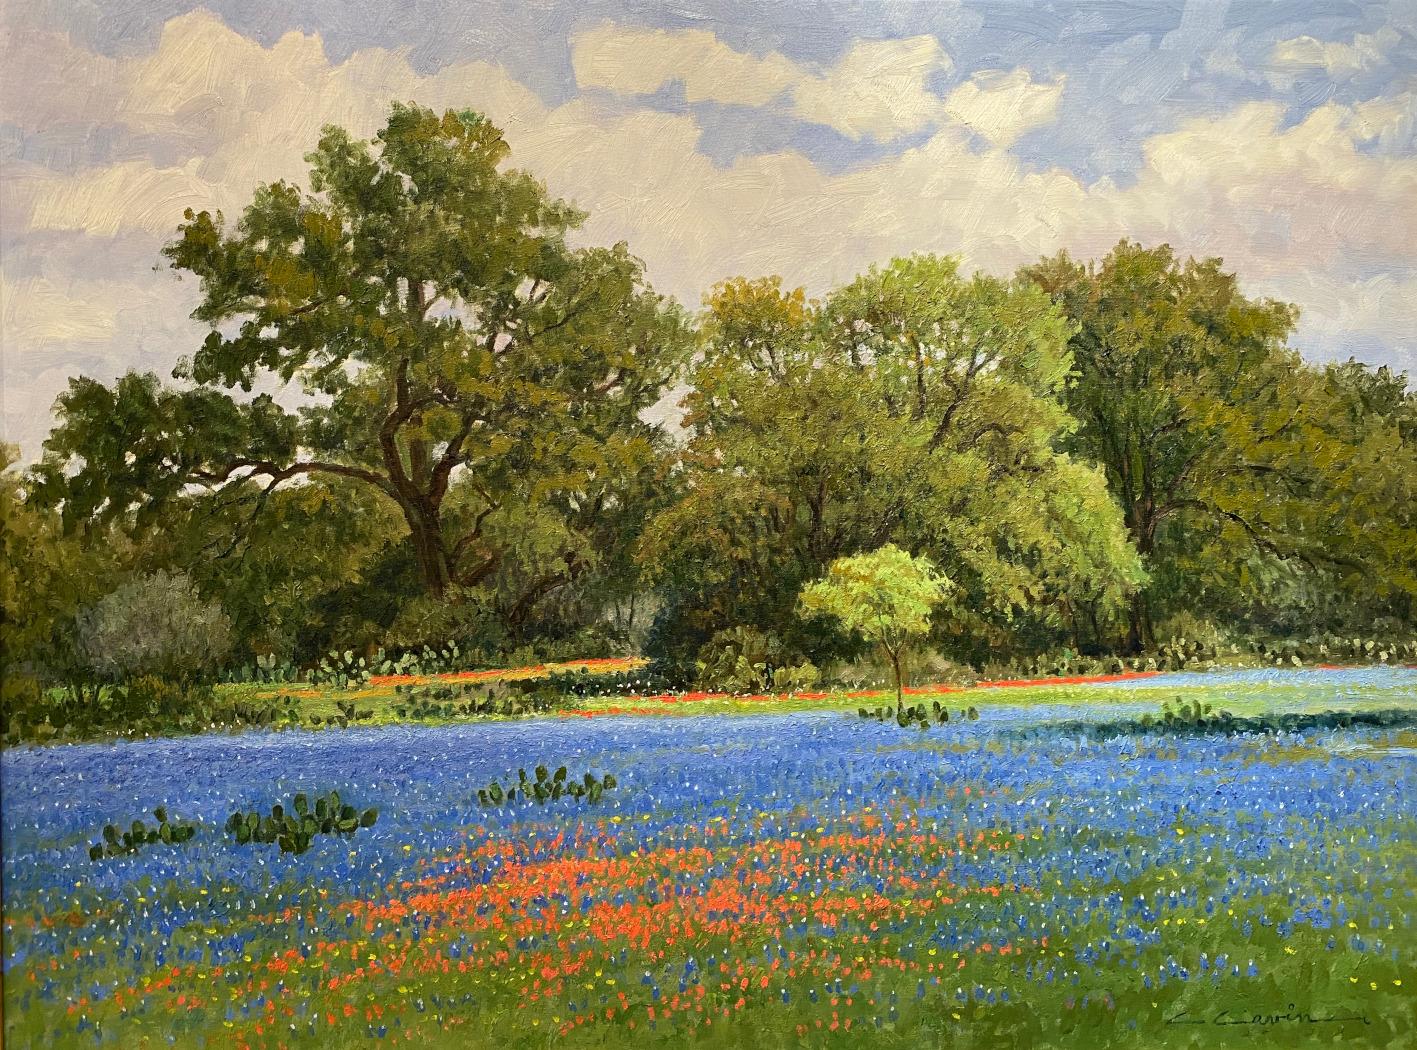 CLIFF CAVIN Landscape Painting - "A TOUCH OF INDIAN PAINT"  TEXAS BLUEBONNETS & INDIAN PAINTBRUSH HILL COUNTRY